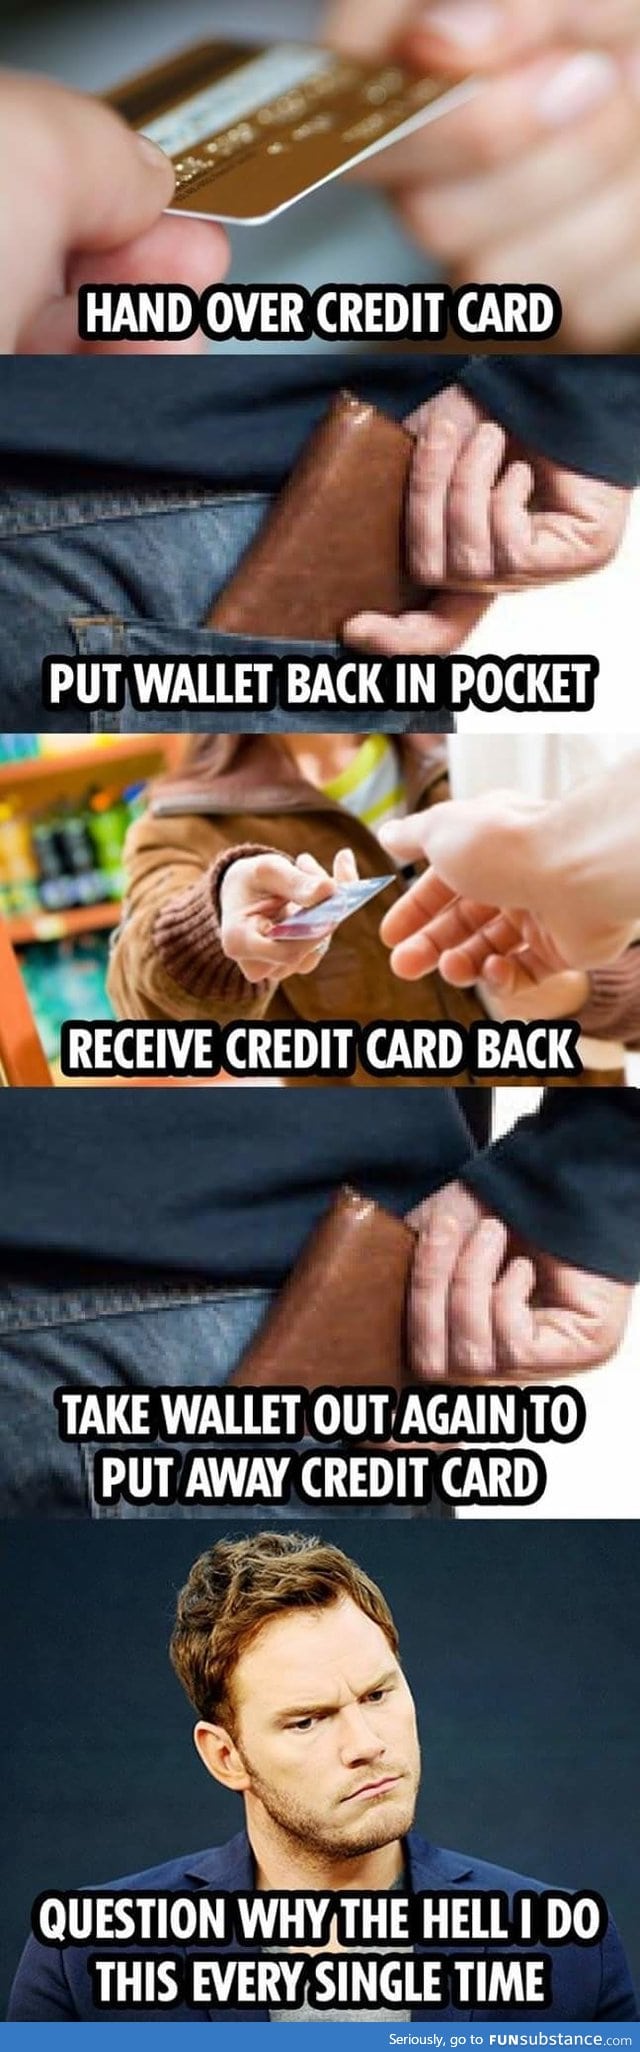 You unknowingly do this when making payments with your credit card